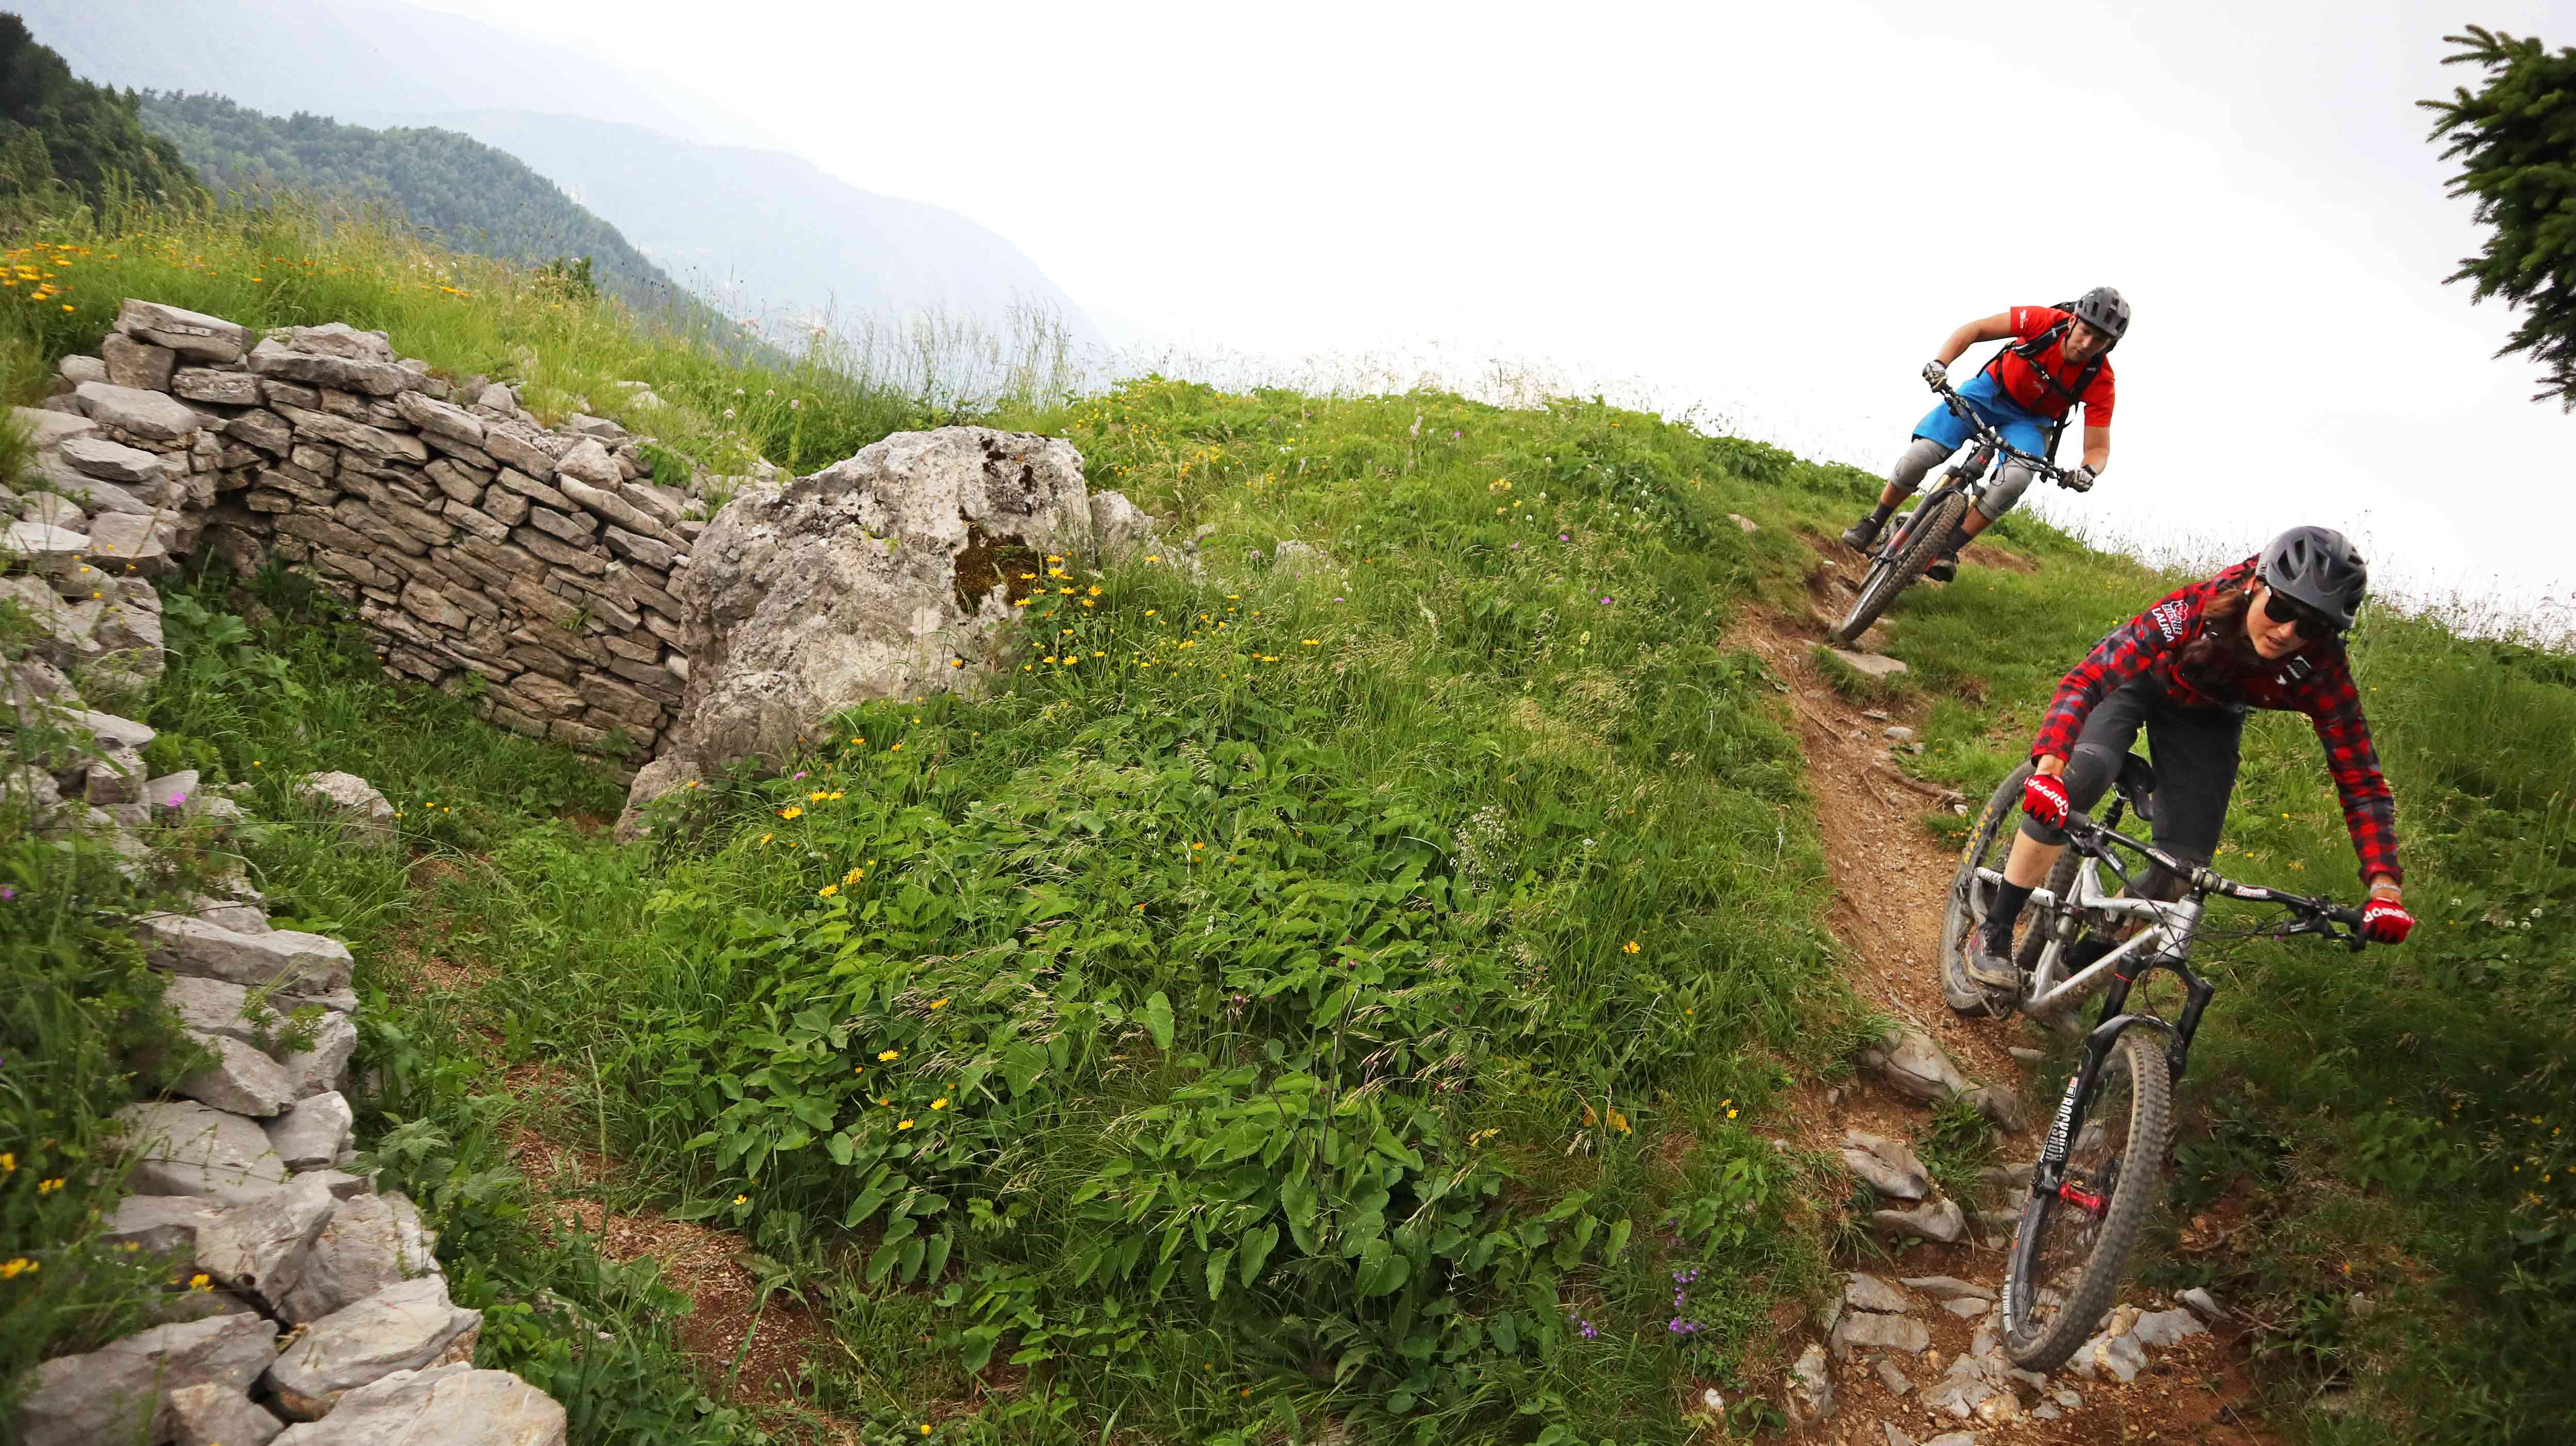 A trail with 2 riders near an old wall in slovenia